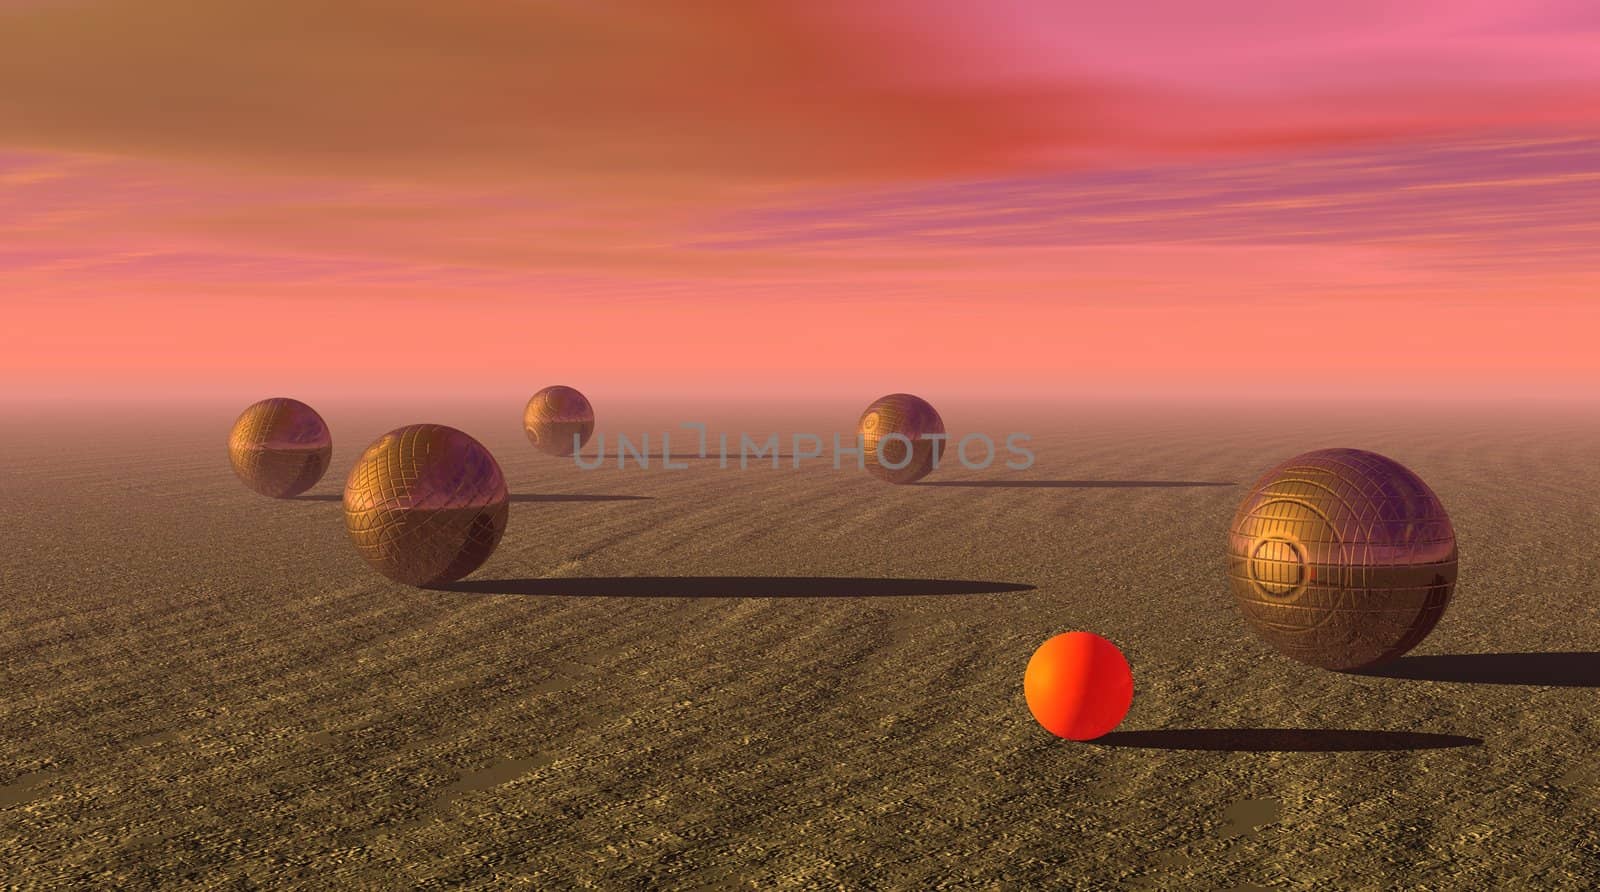 Five metallic petanque balls and the small orange jack on the ground by beautiful sunset